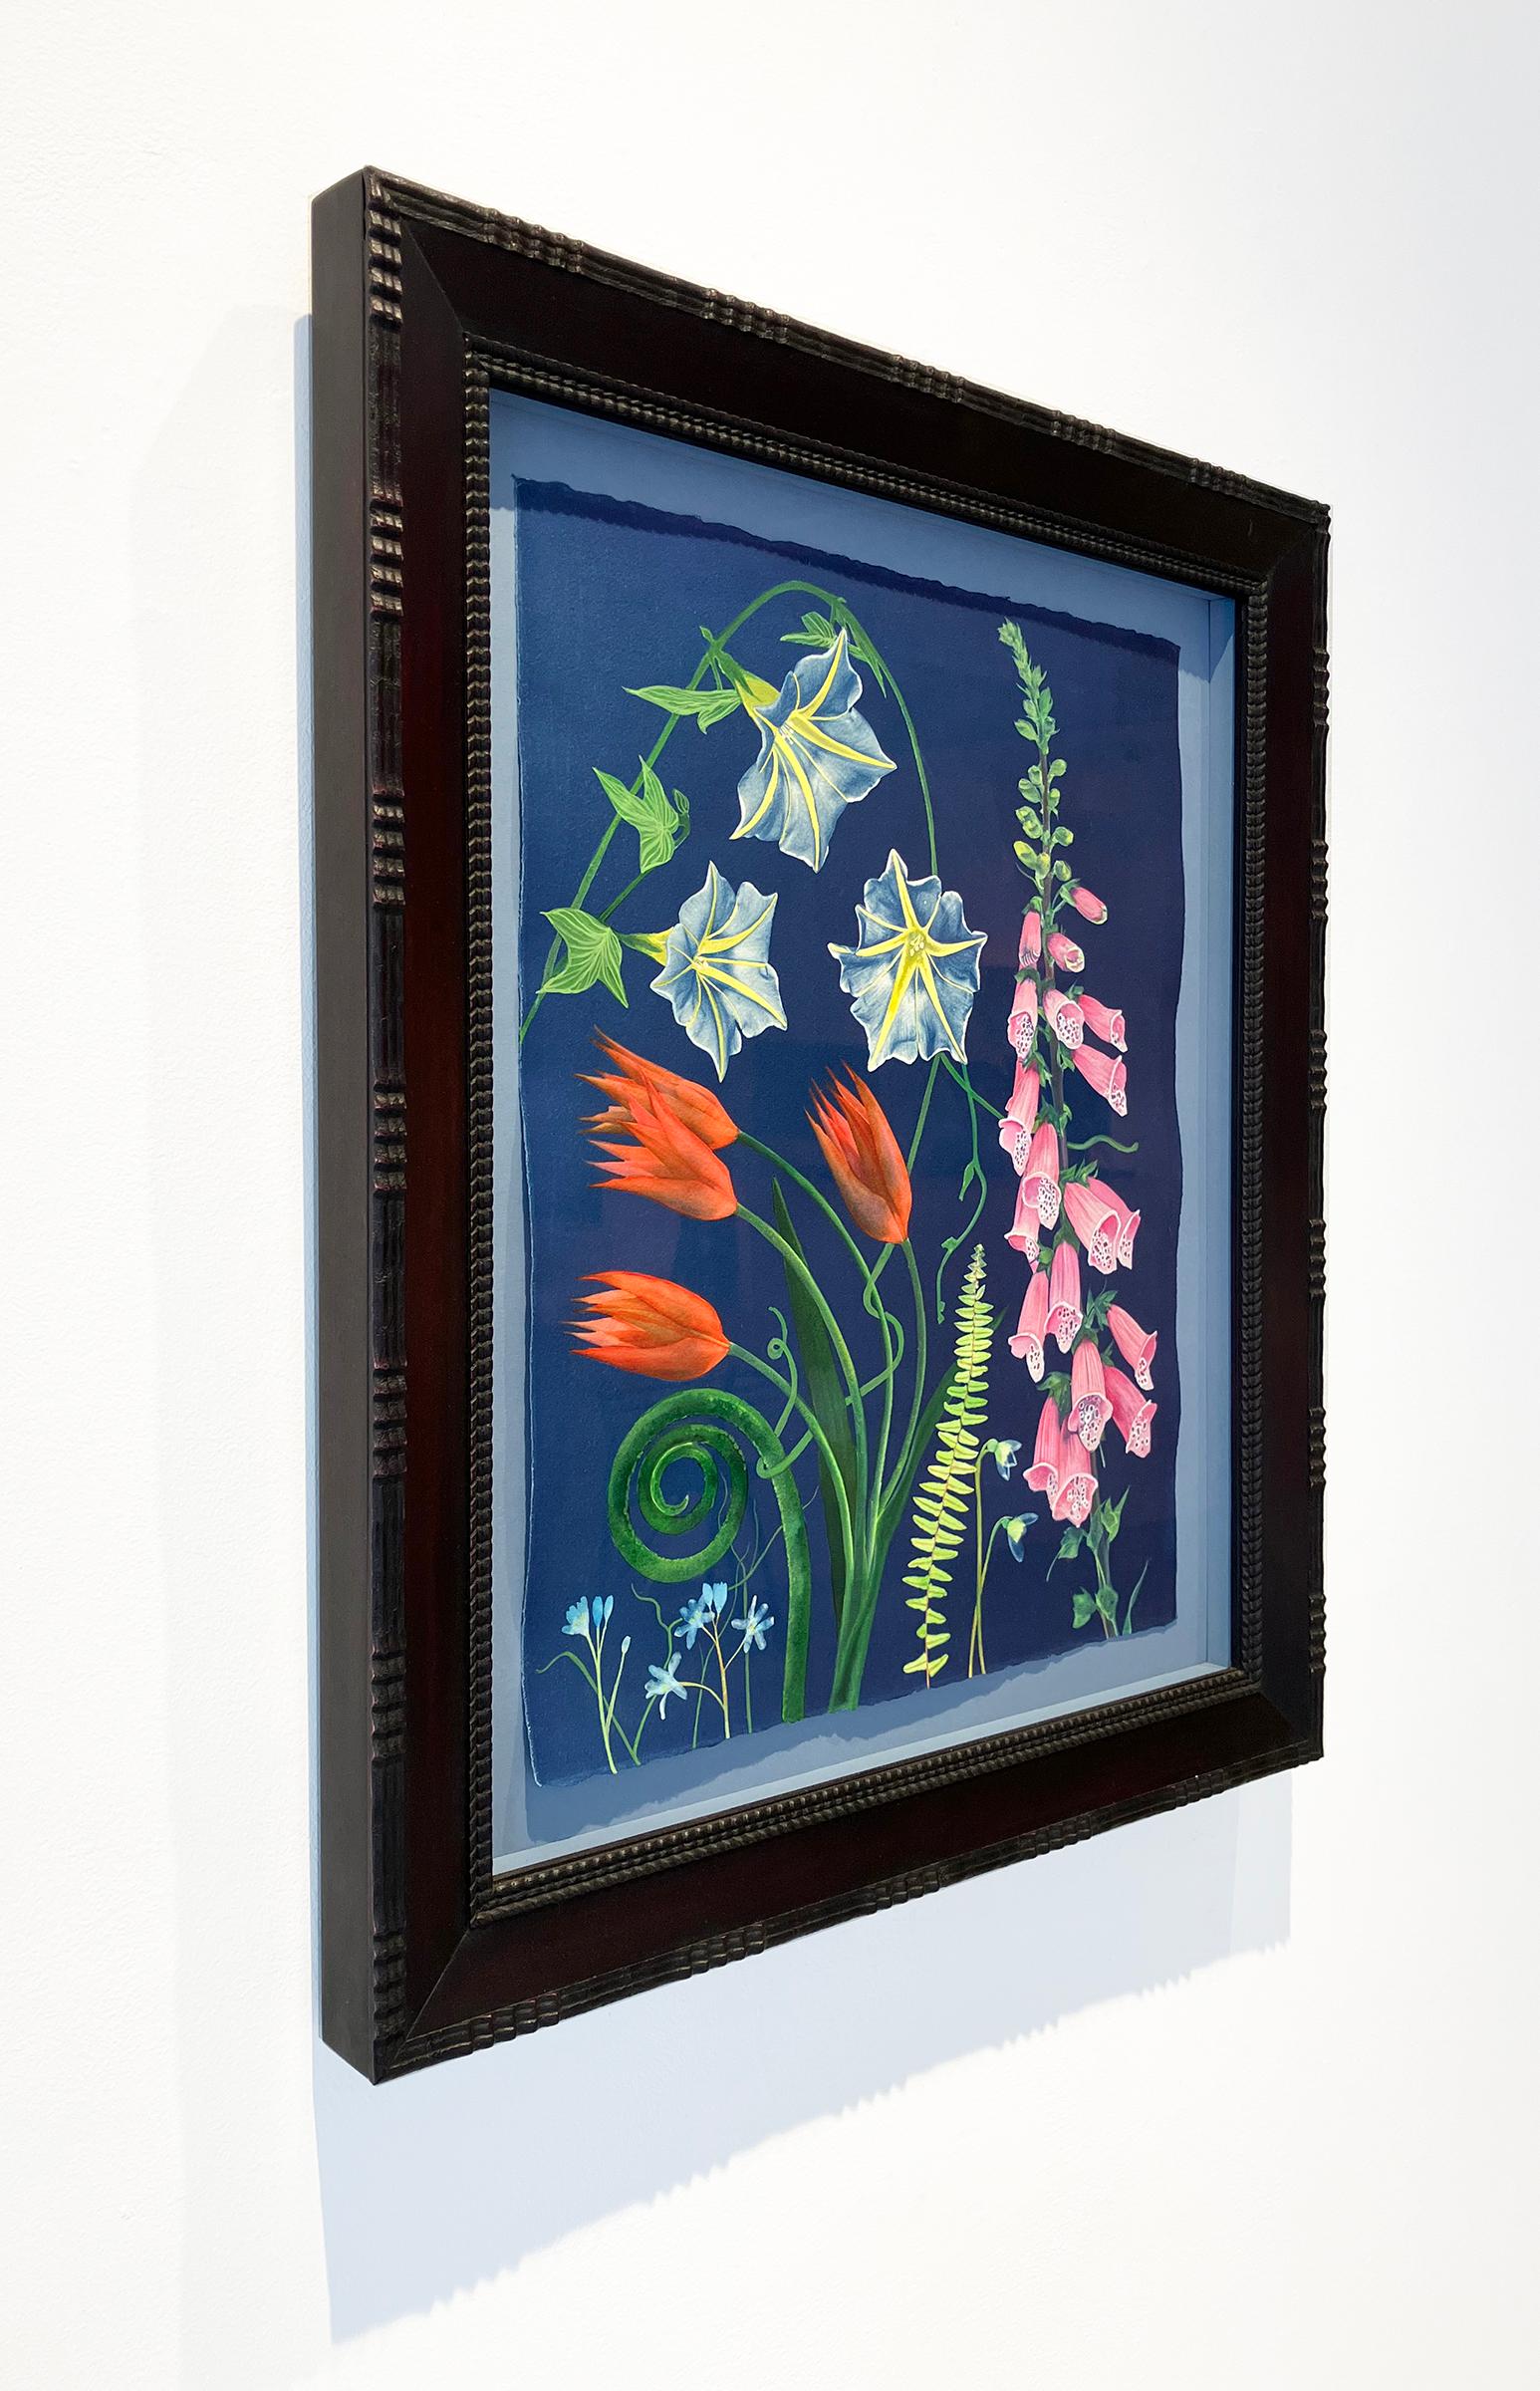 Realistic still life painting of bright flowers on dark blue
Hand-painted cyanotype by Julia Whitney Barnes
